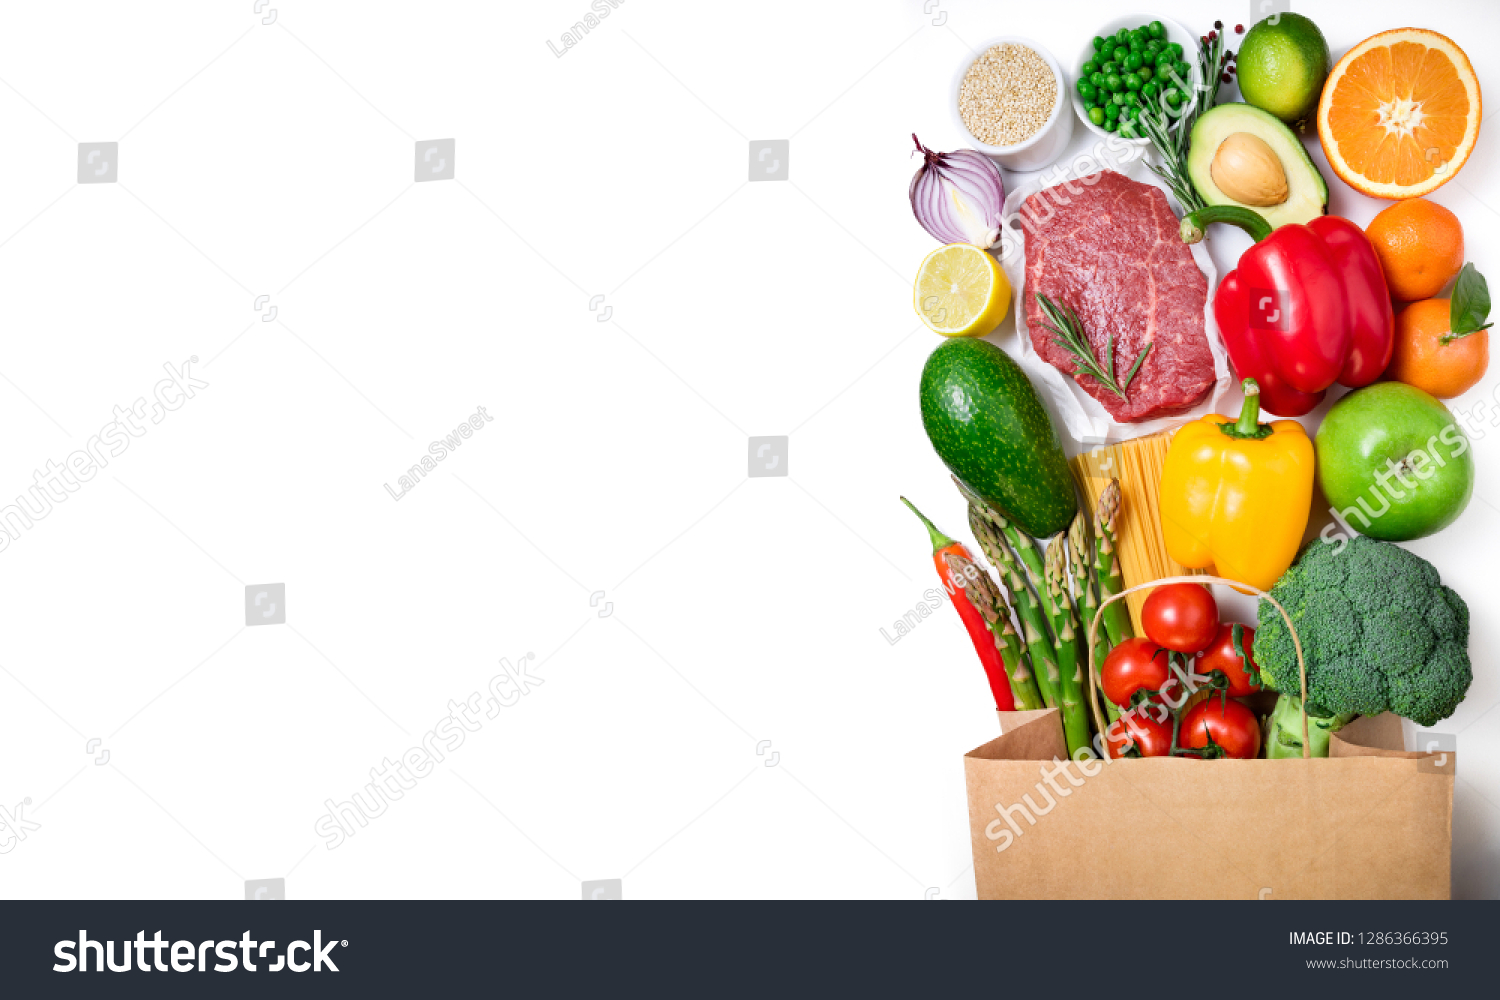 Healthy food background. Healthy food in paper bag meat beef, fruits, vegetables and pasta on white background. Shopping food supermarket concept. Long format with copy space #1286366395